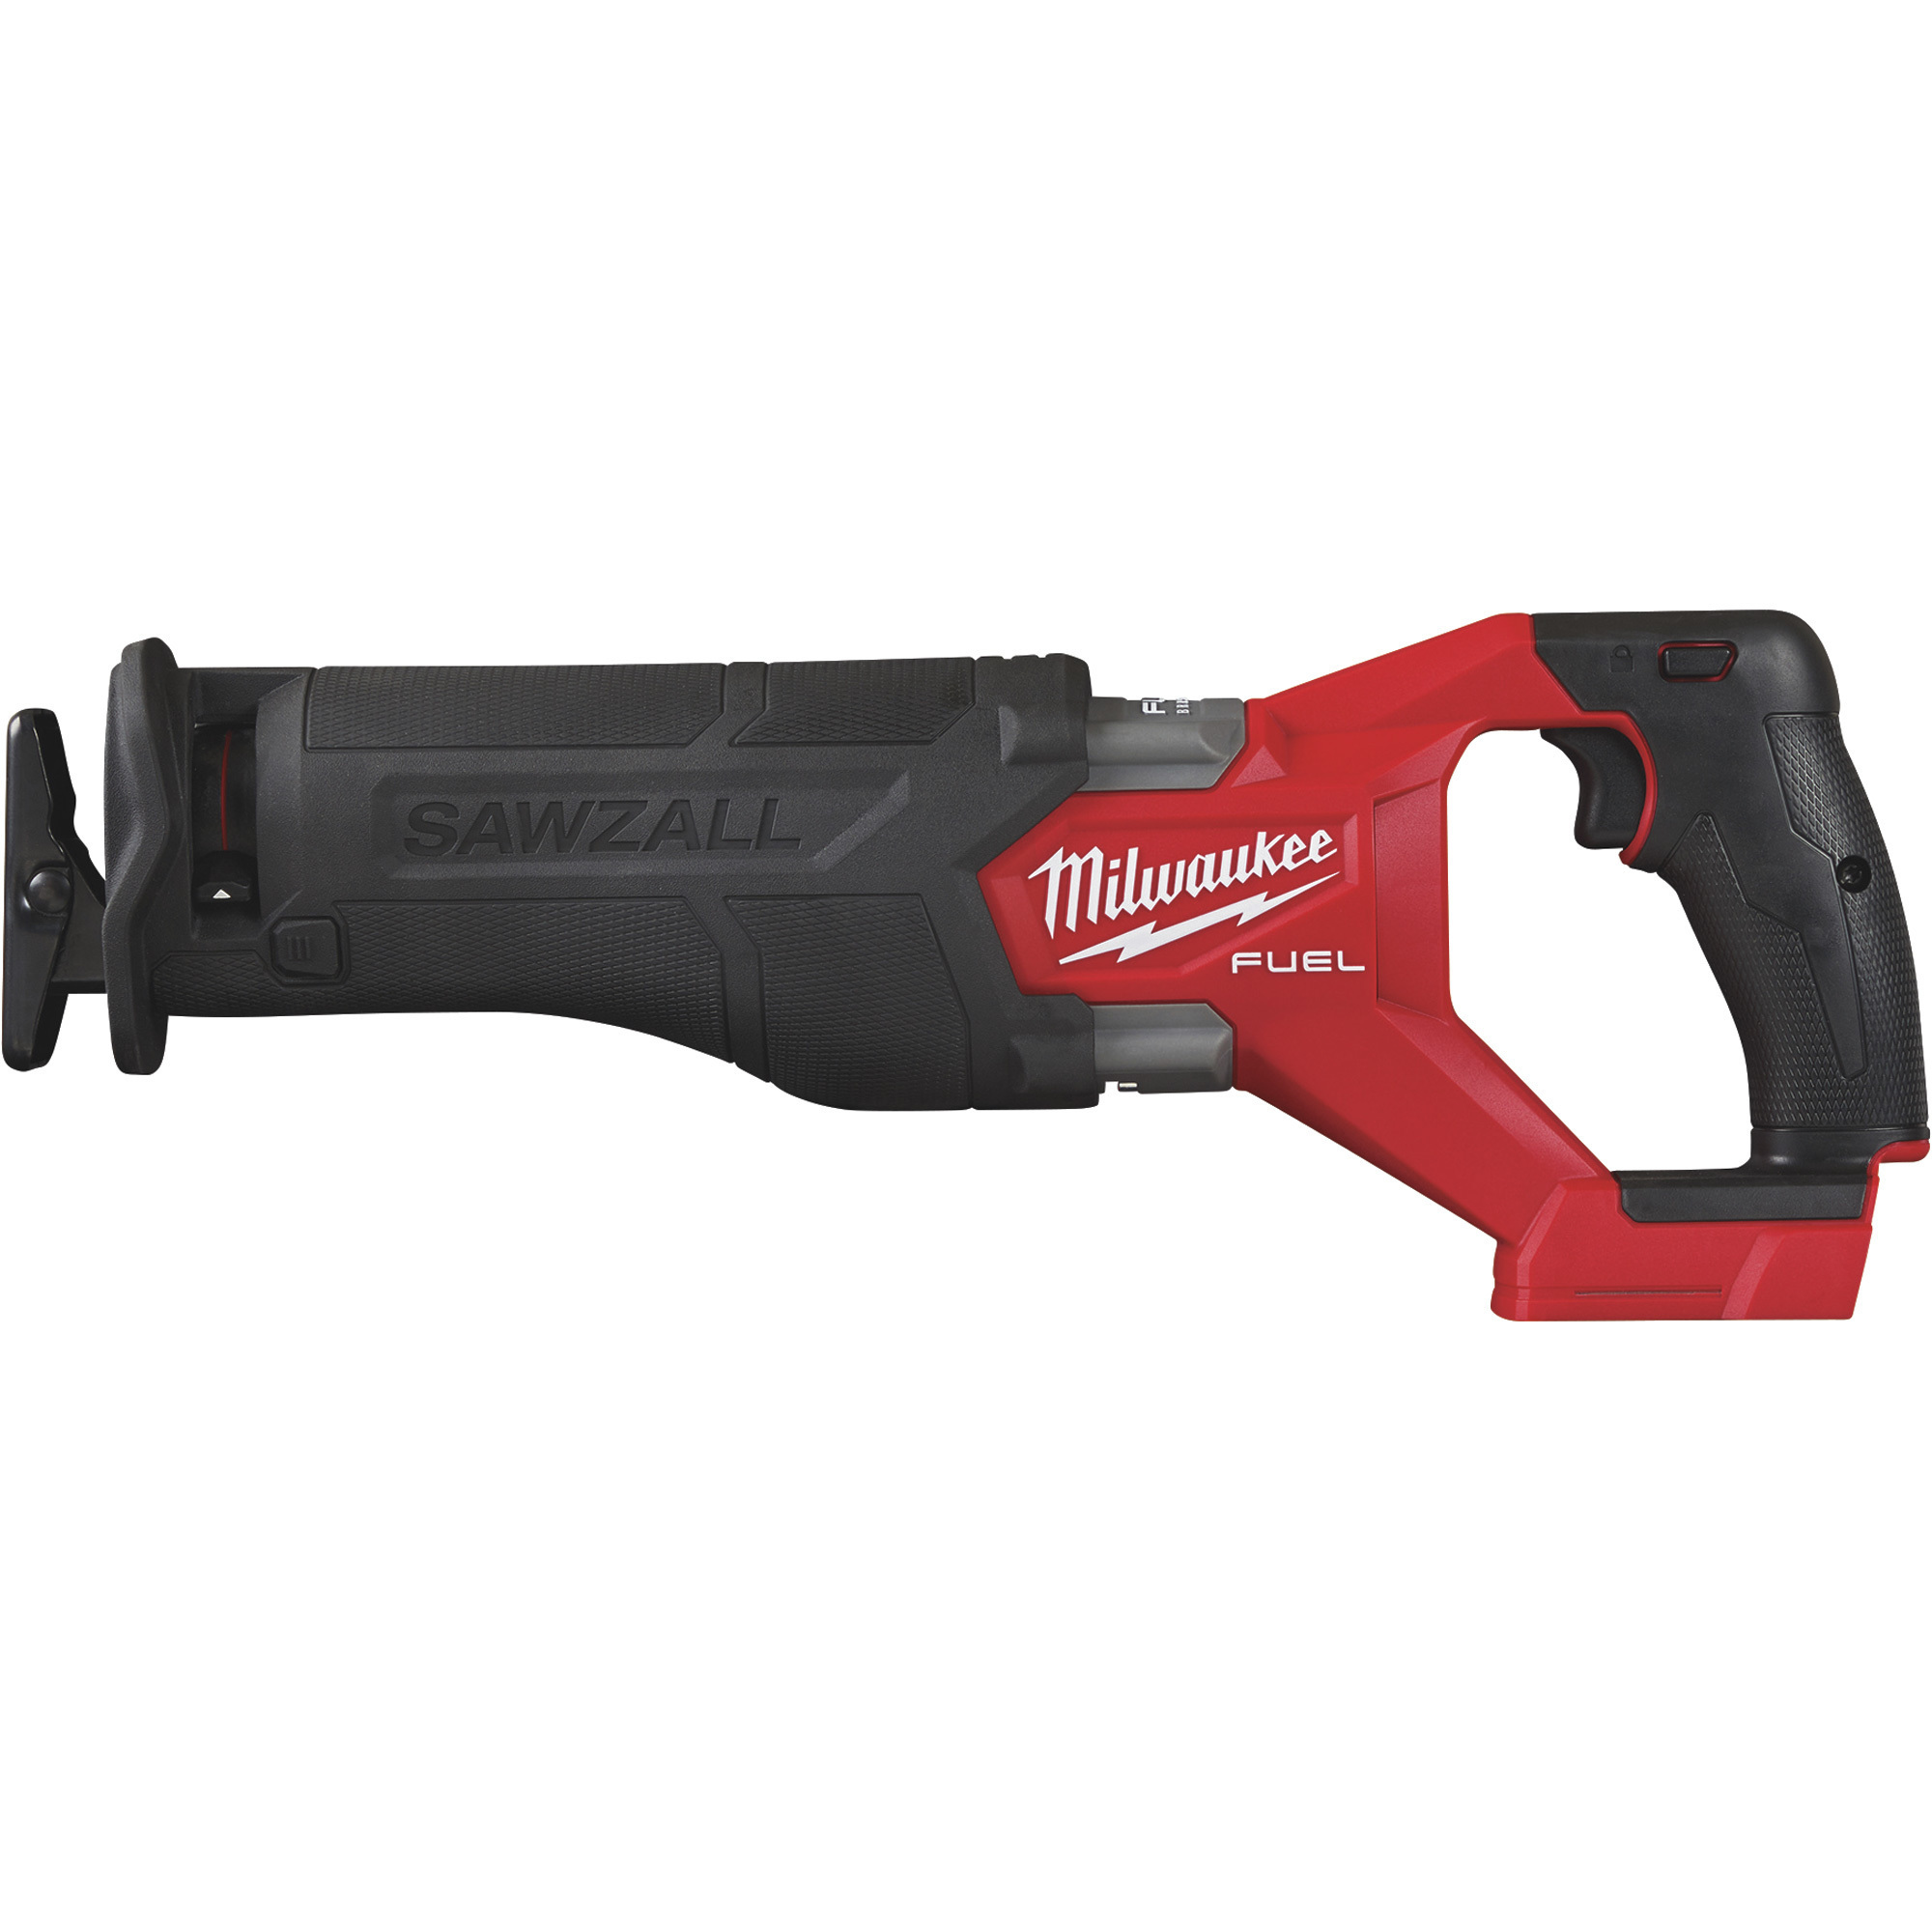 Milwaukee M18 FUEL Sawzall Reciprocating Saw, Tool Only, Model# 2821-20